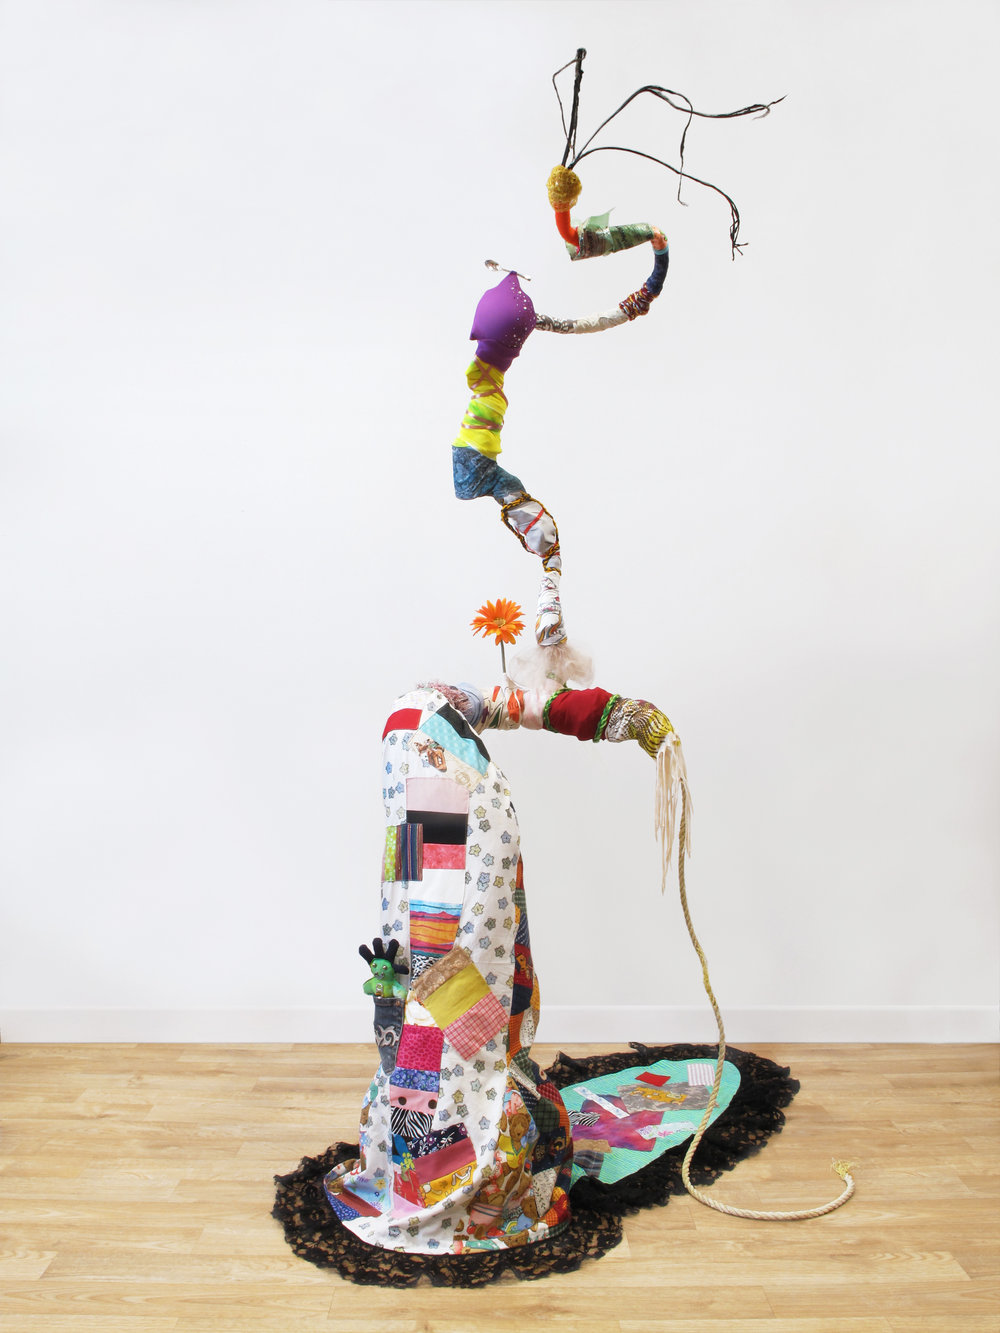  Gina Herrera, A Belle of Consequence , Assorted found materials, 76 x 44 x 47 inches "An assemblage of discarded and repurposed objects take on an antebellum feminine form."   